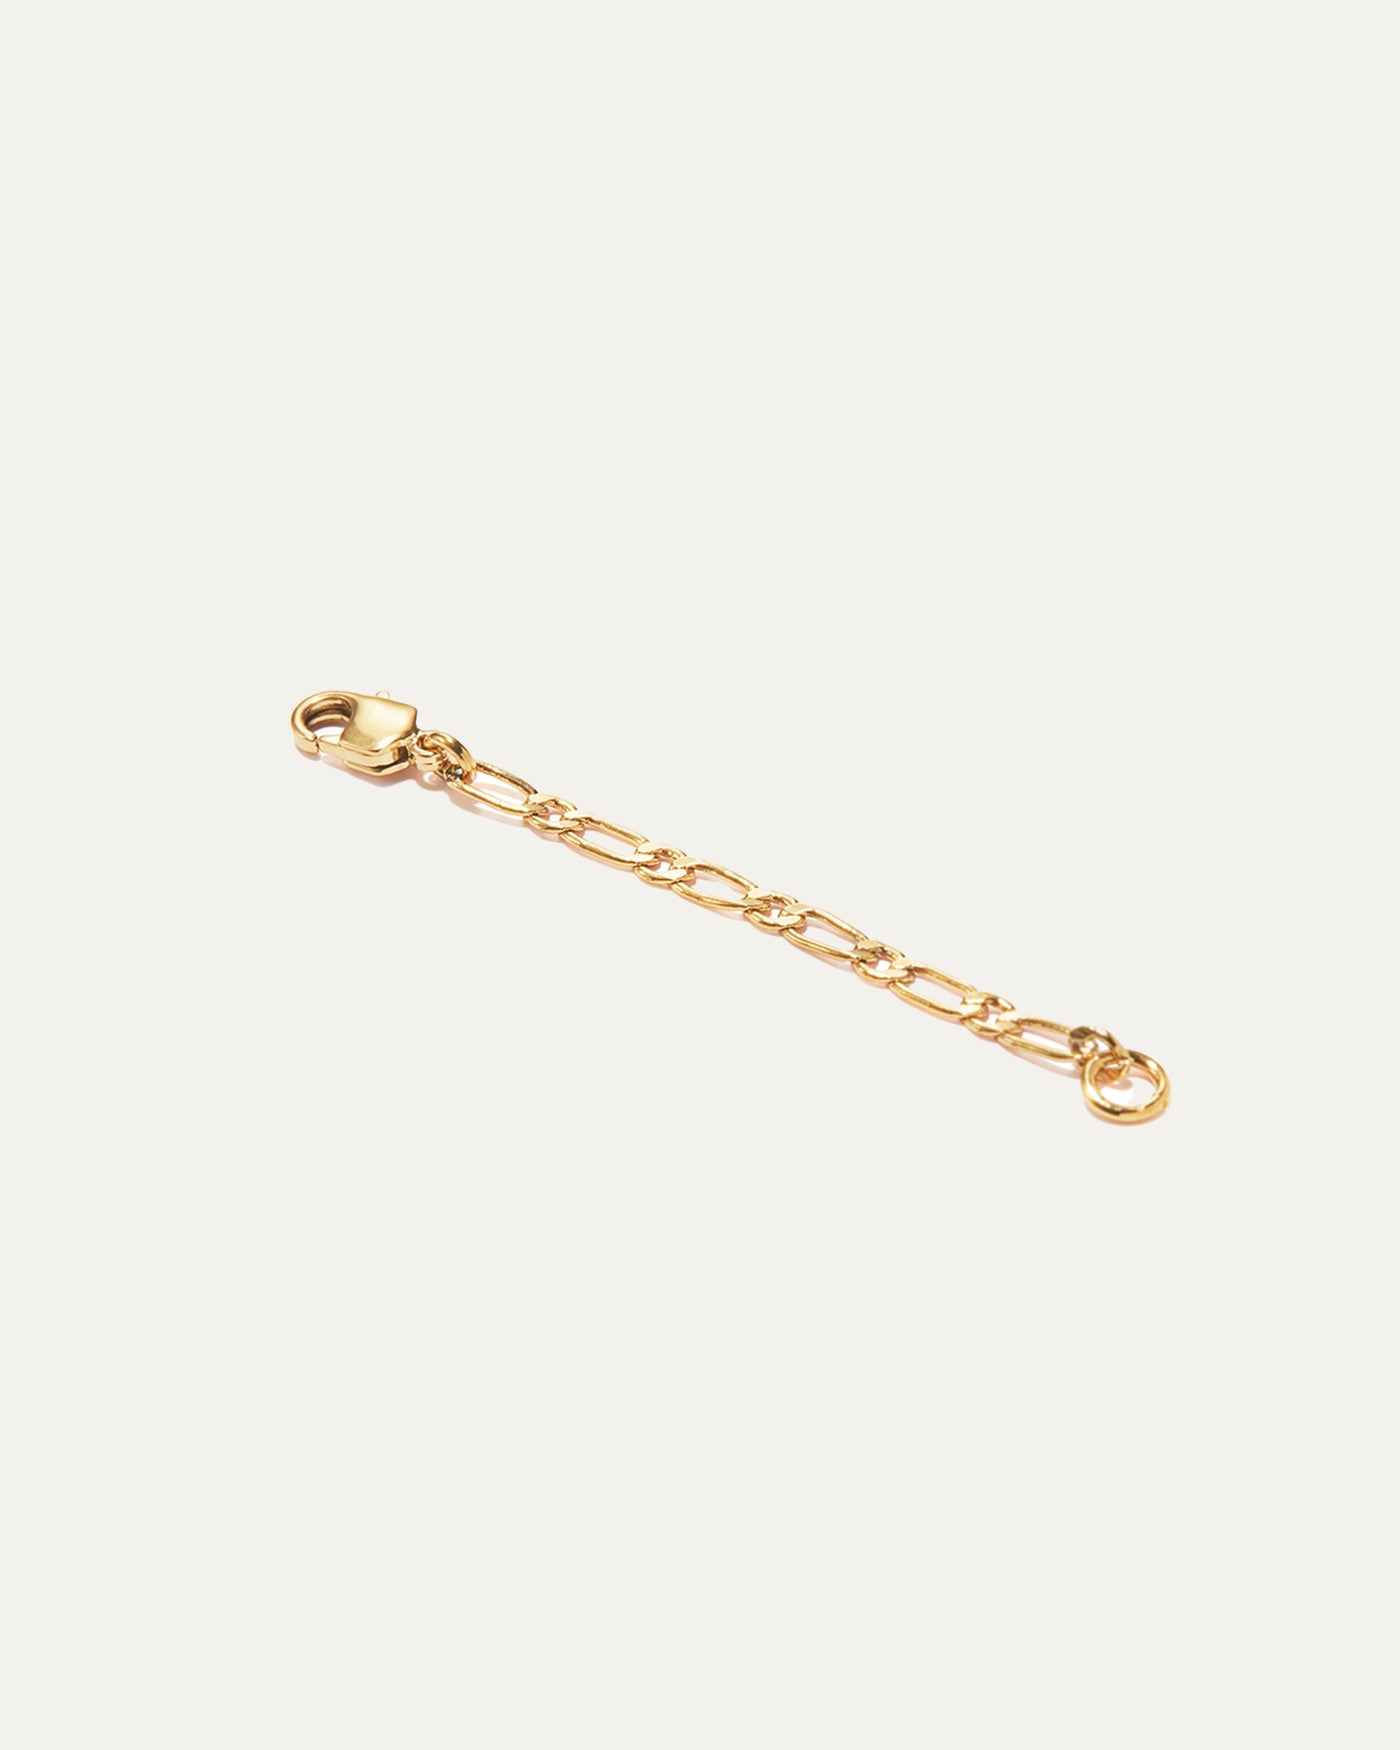 Gold Plated Necklace Extender, Gold Necklace Shortener, Gold Chain Shortener, Gold Necklace Extension, Gold 2 inch Extender (x18)